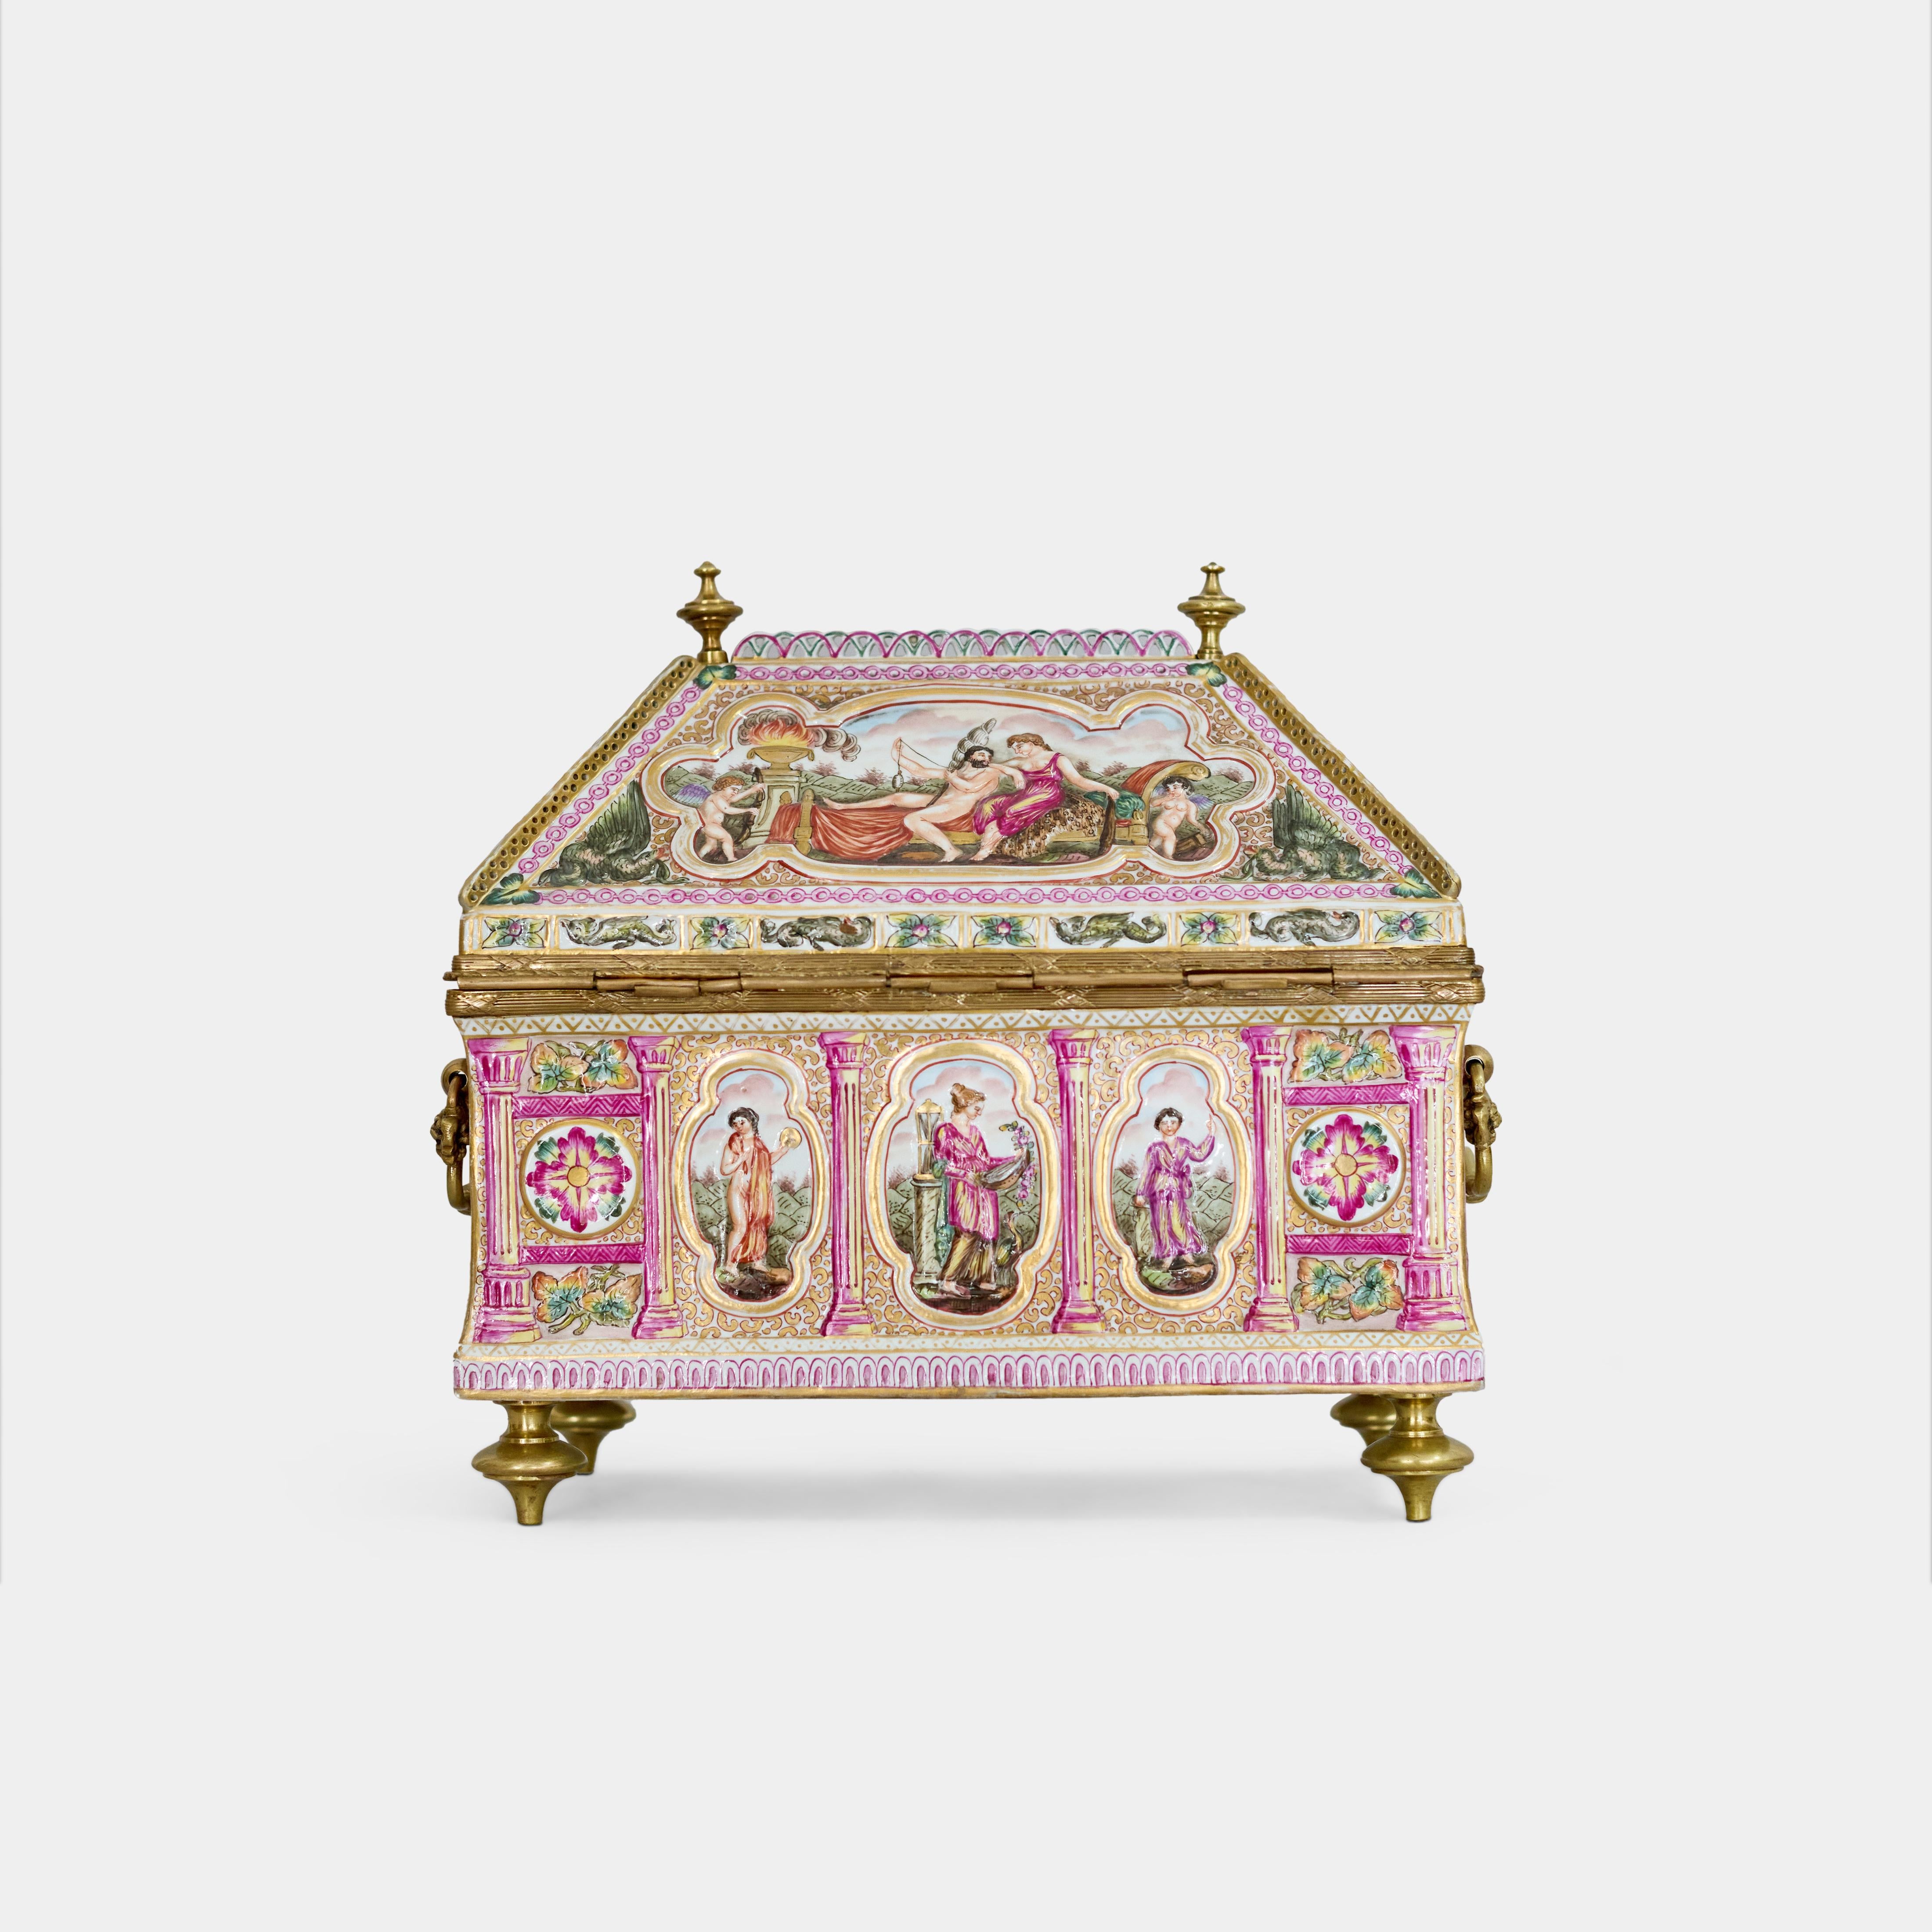 A Large Antique Italian Capodimonte Hinged Box & Cover  In Excellent Condition For Sale In Los Angeles, CA